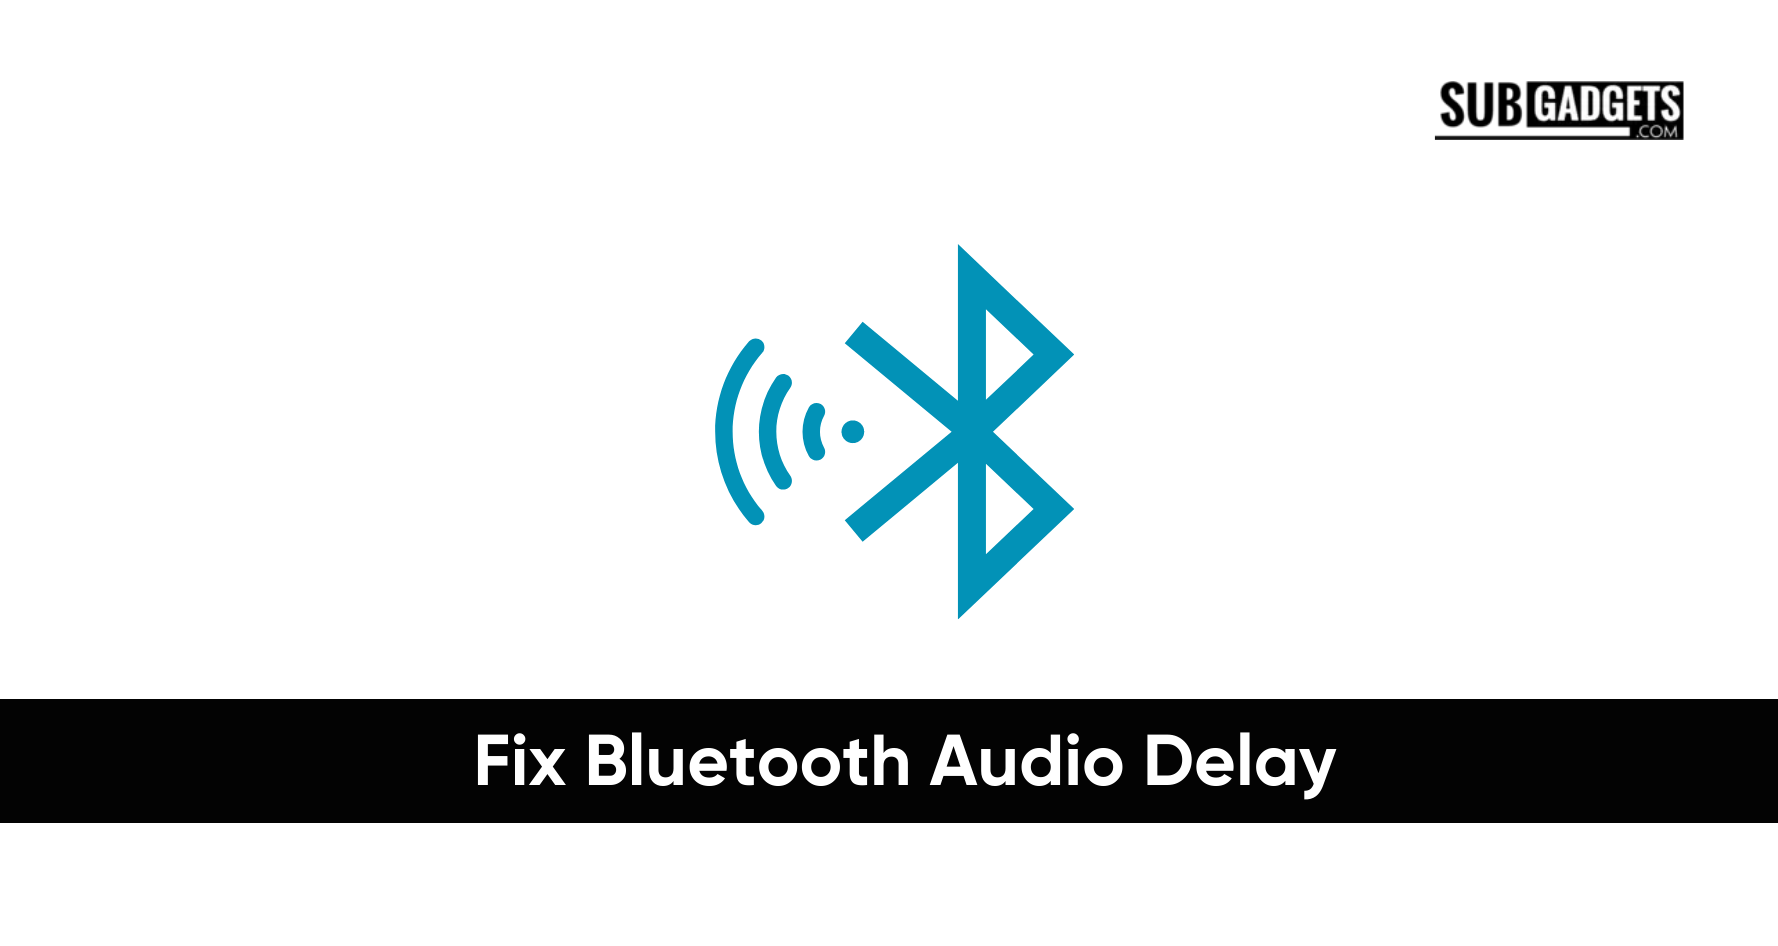 How to fix Bluetooth Audio Delay in Android